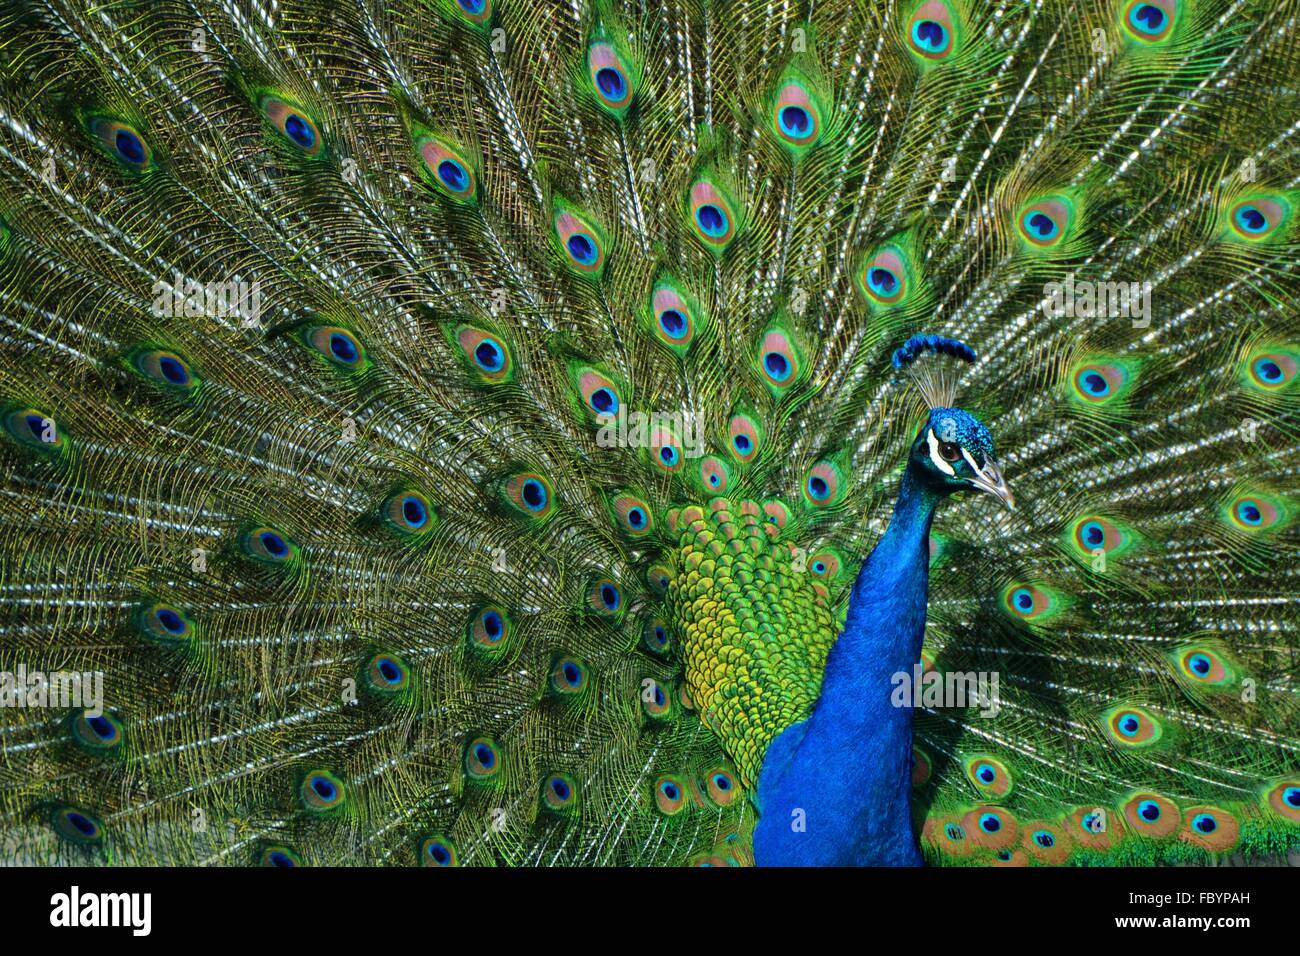 Peacock with Tailfeathers Extended Stock Photo